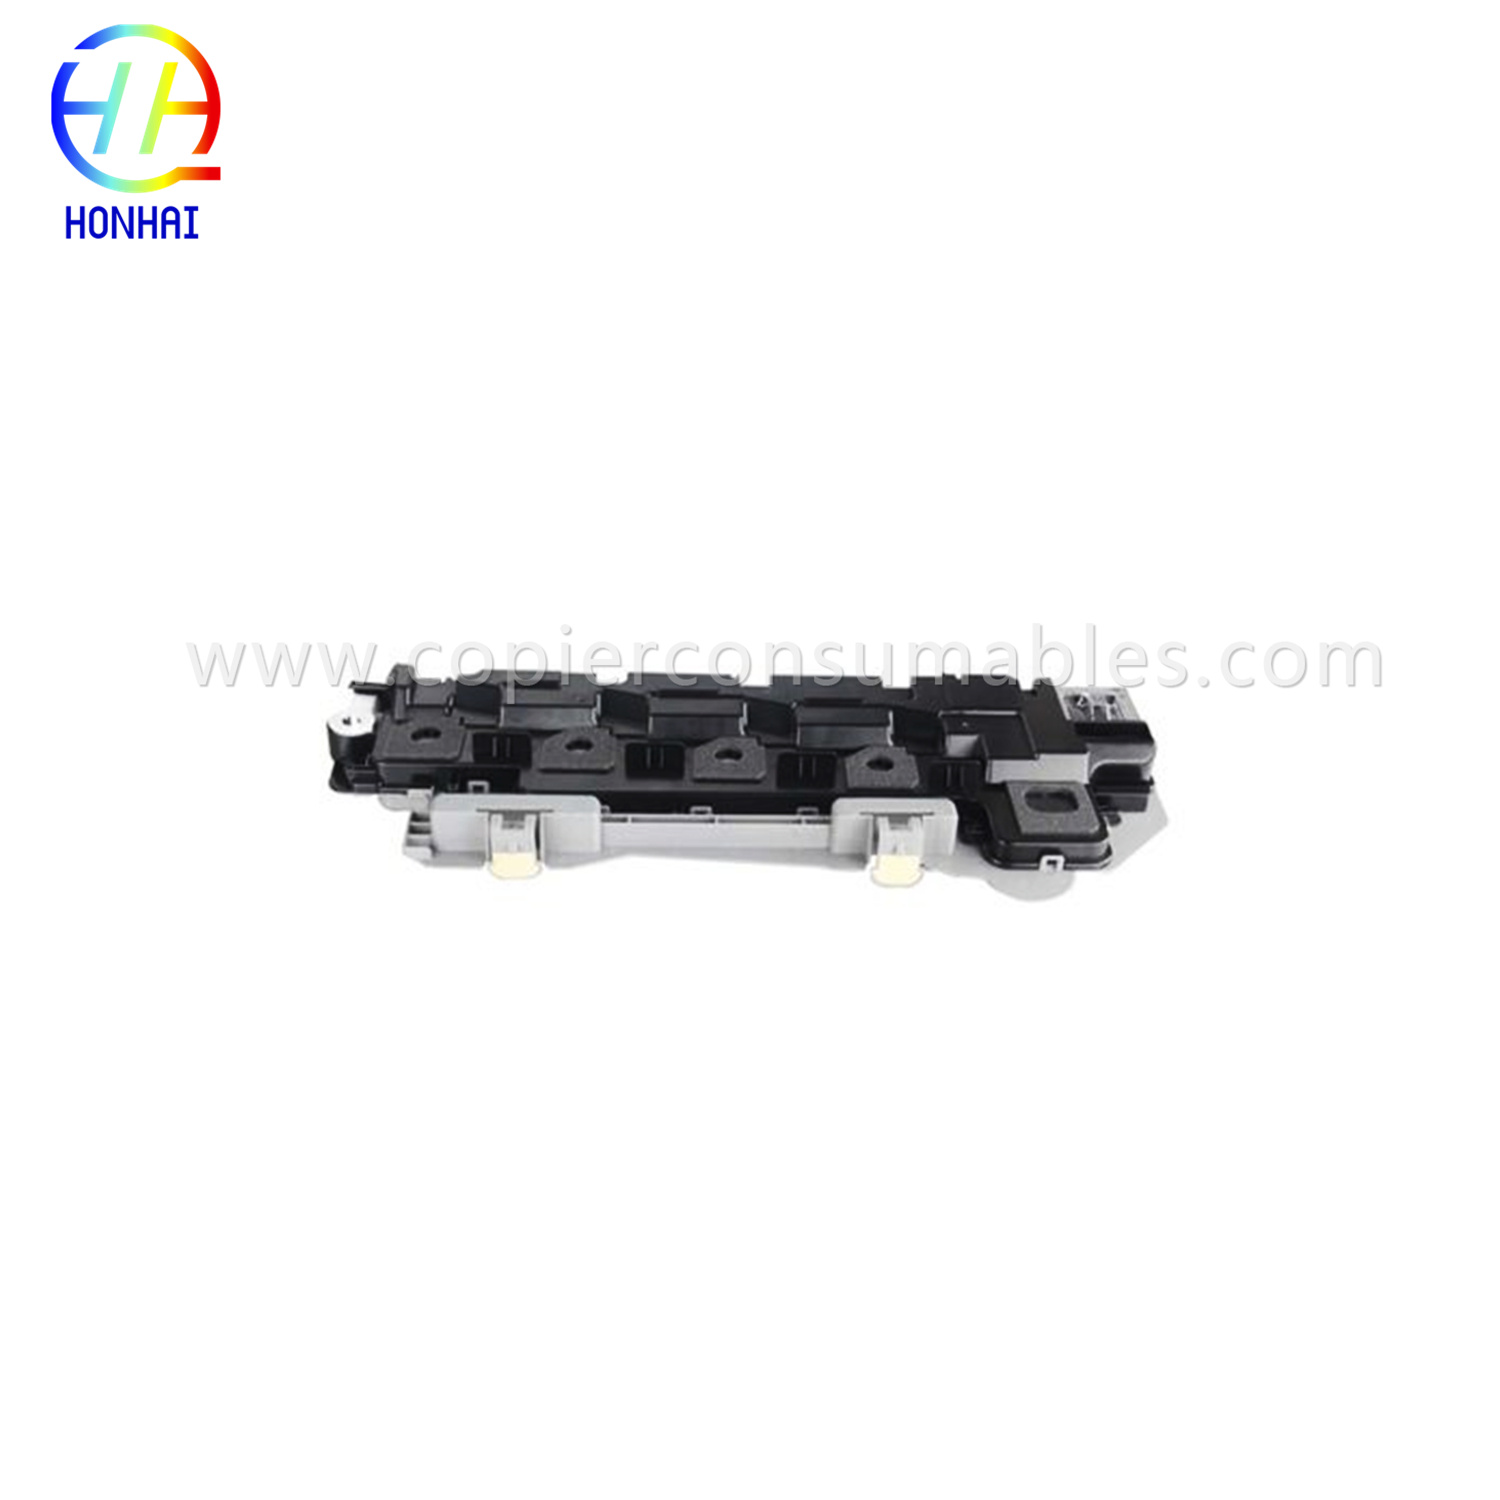 Waste Toner Container for Xerox Sc2020 Sc2021 2020 2021 (CWAA0869) (2)